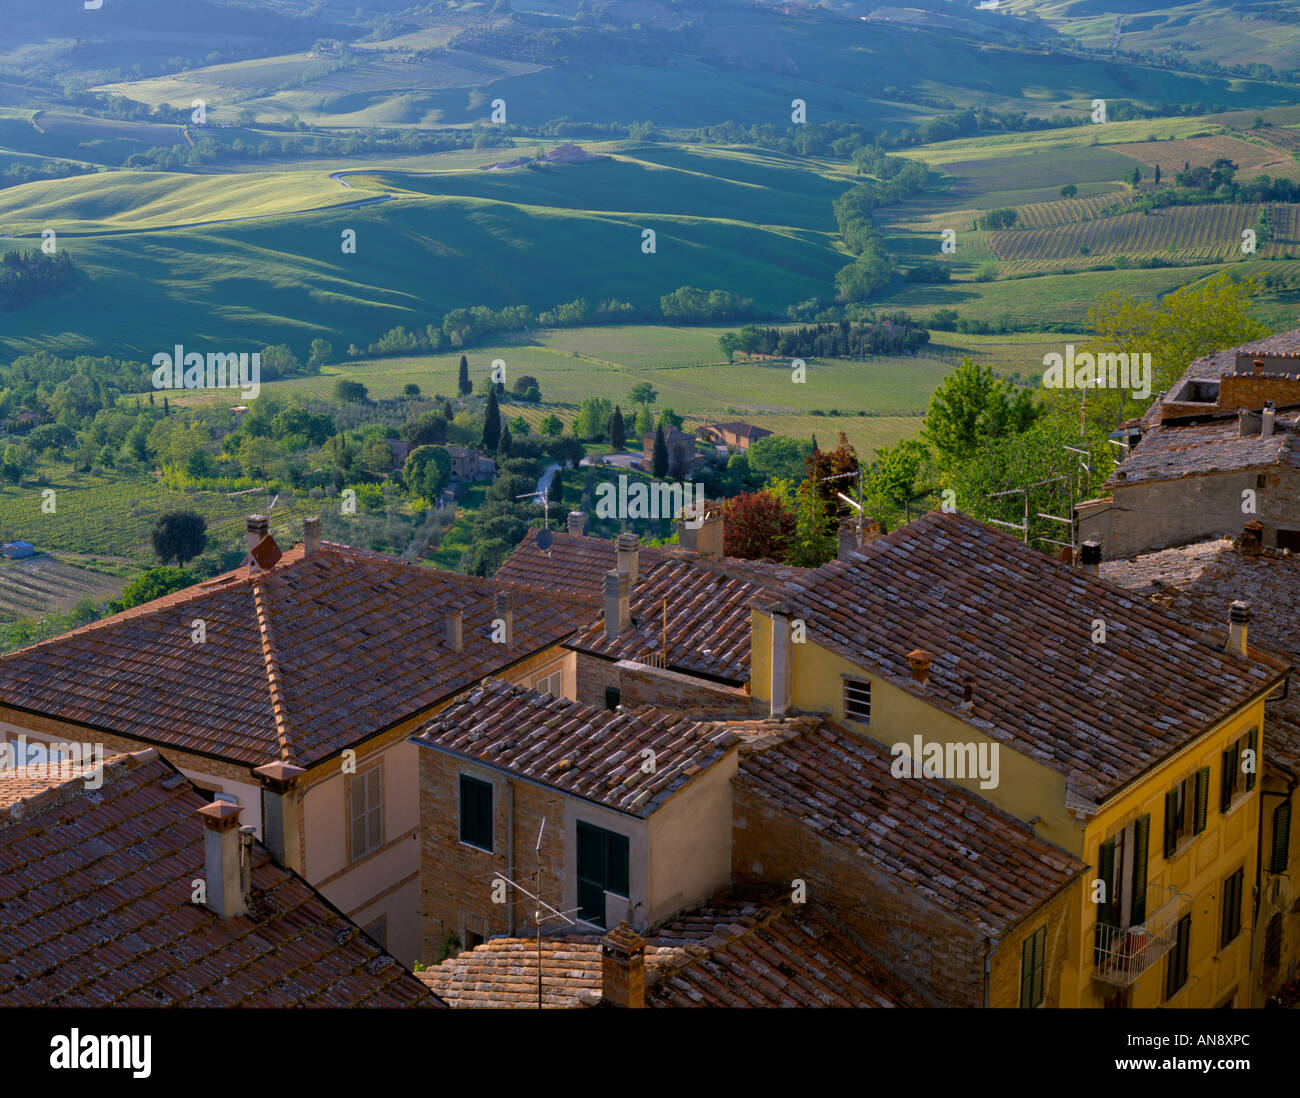 Tuscany Italy Tiled roofs of Montepulciano with farms green fields and vineyards in the valley below Stock Photo